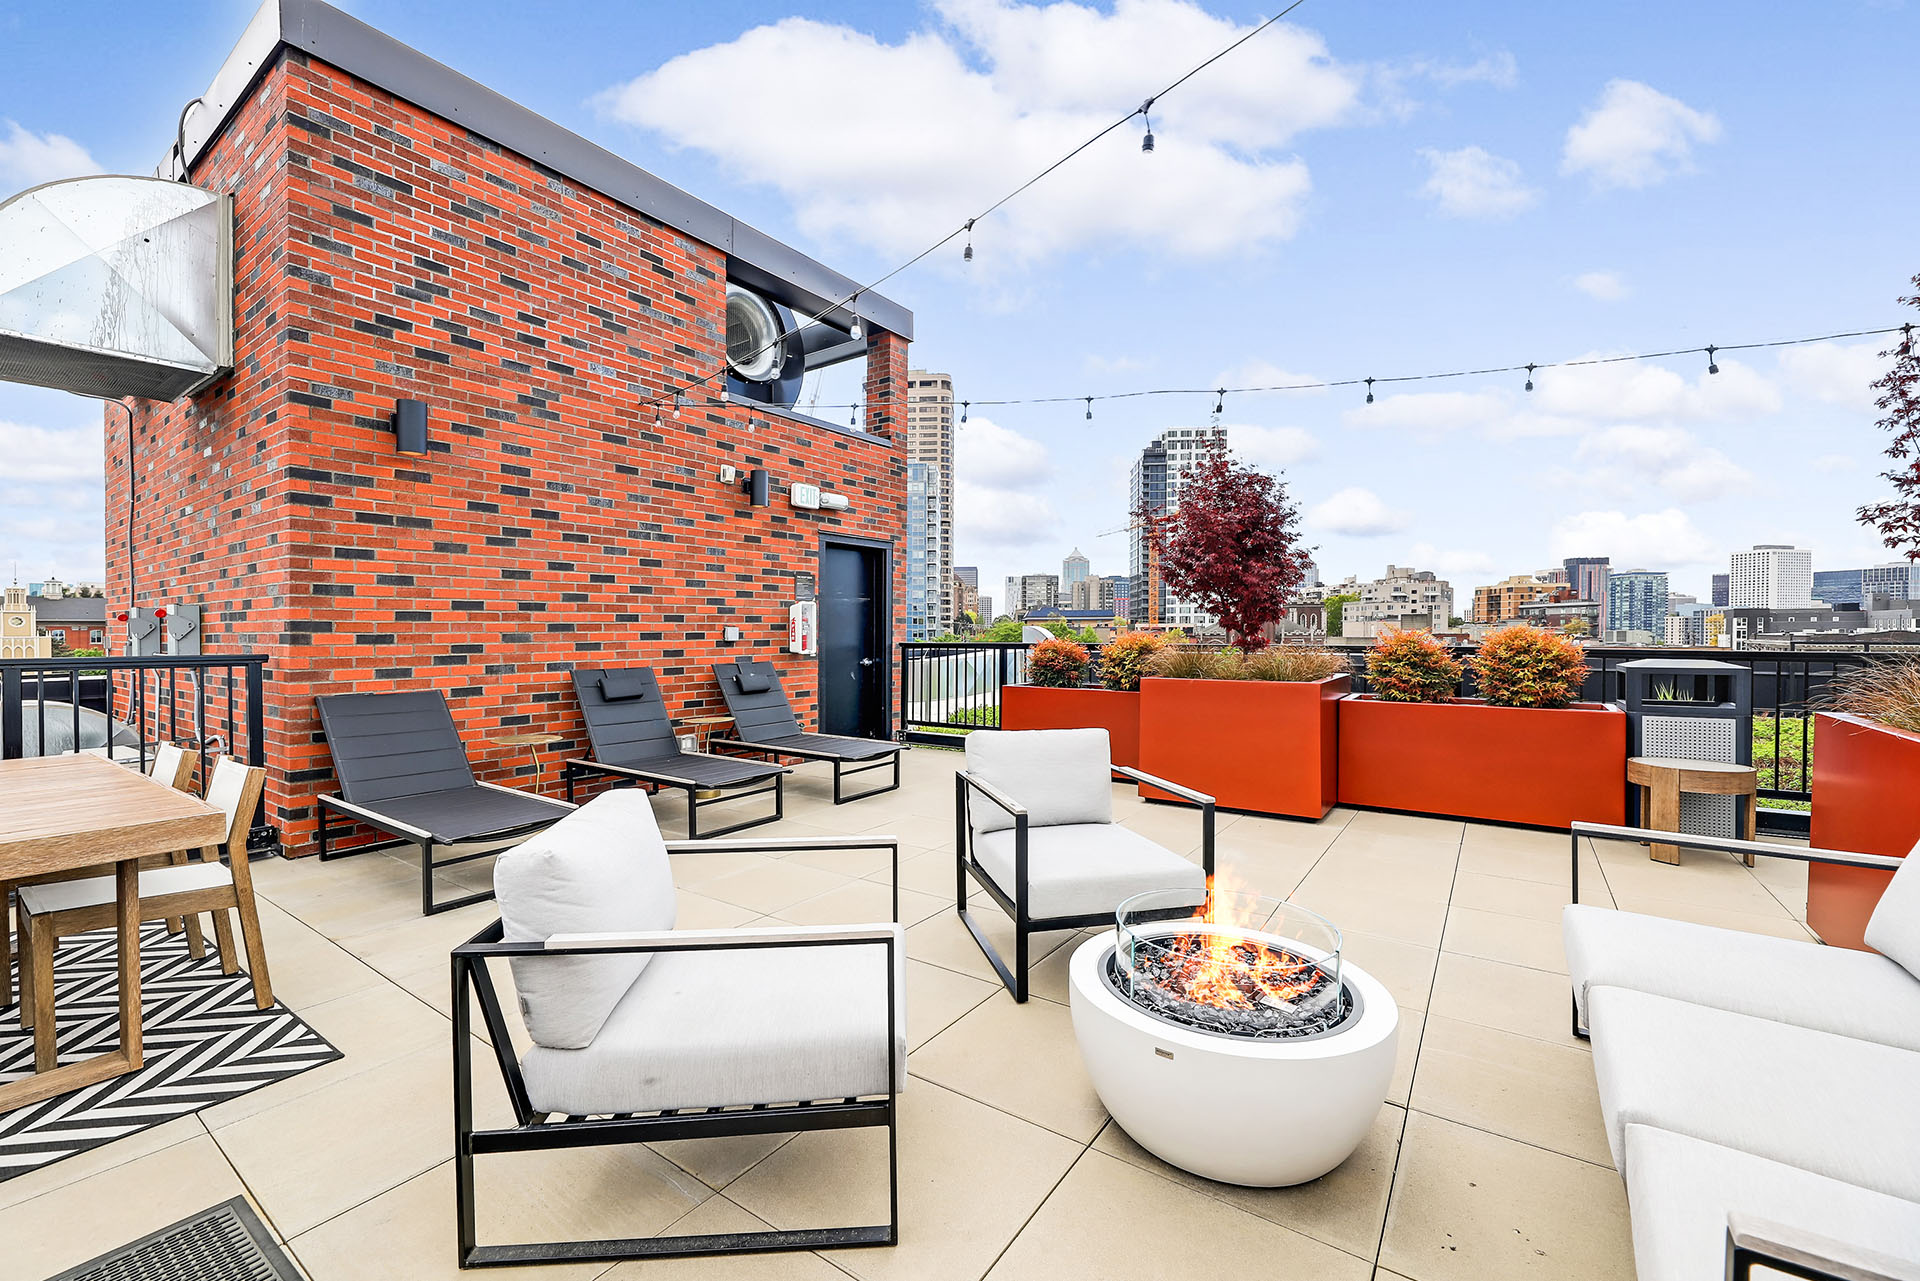 Woodworth Rooftop Firepit, Lounge, and Grill